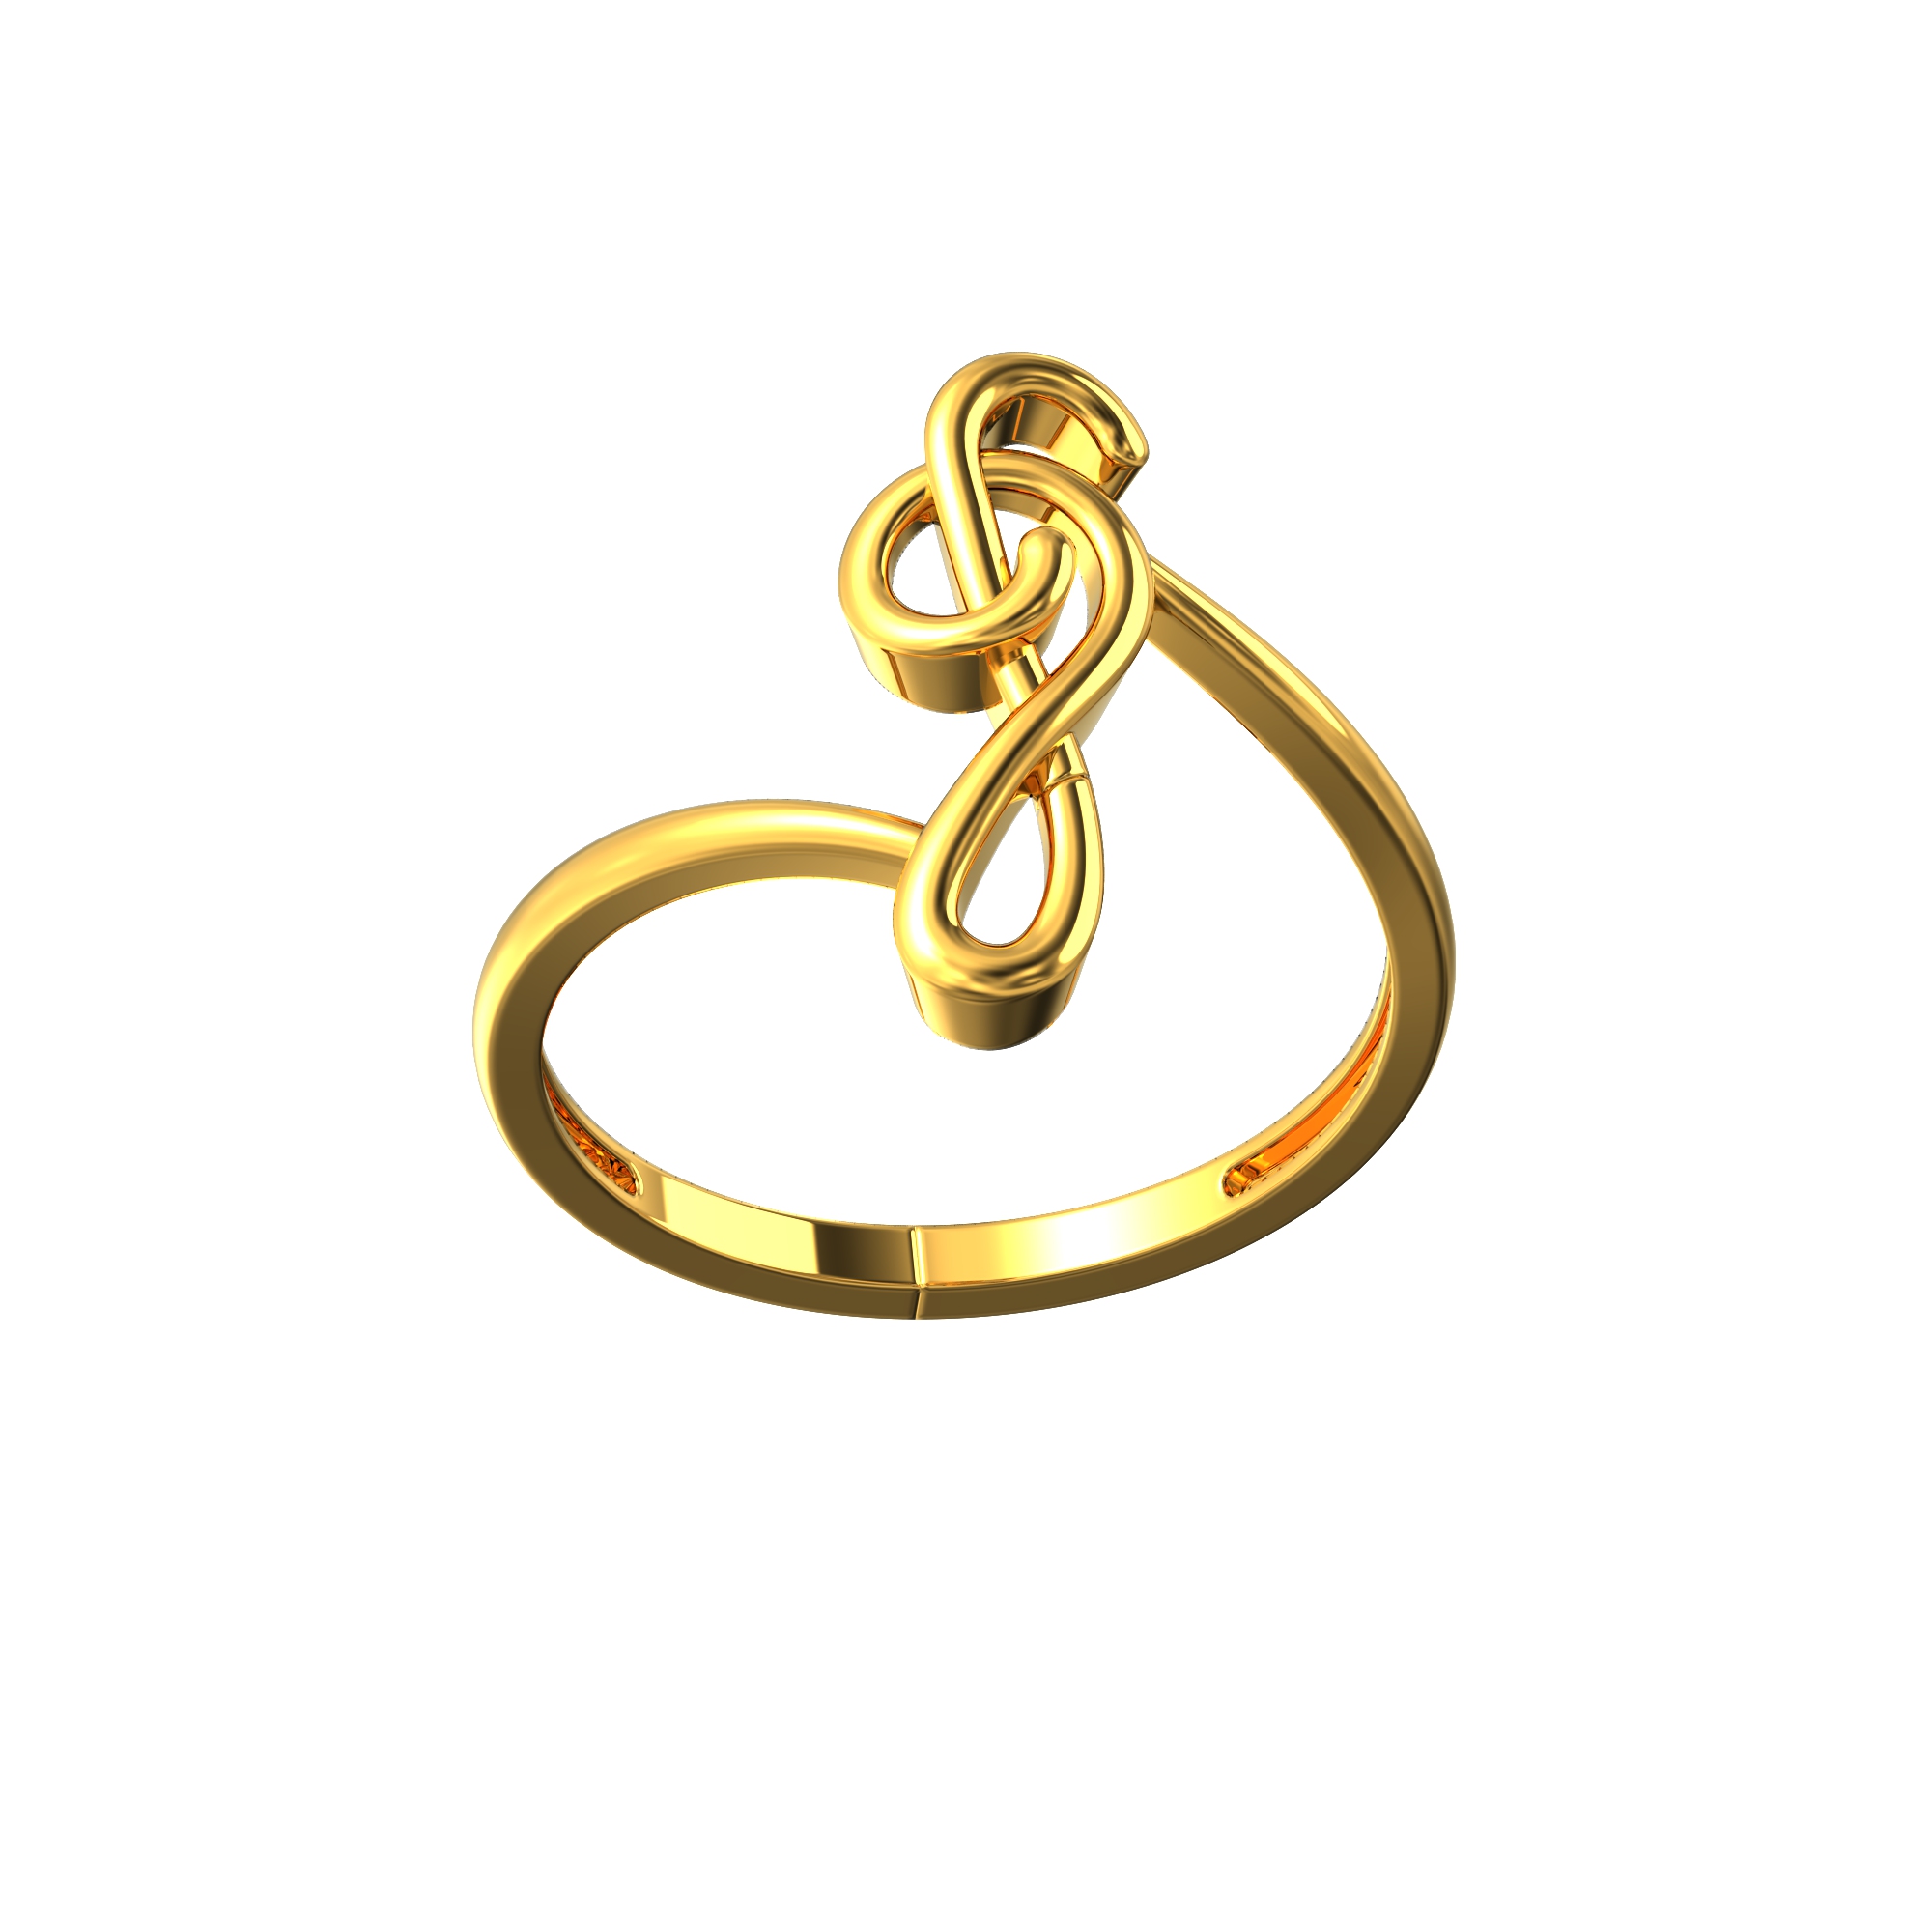 Musical Notes on Score Shaped Music Themed Ring in Gold | DOTOLY